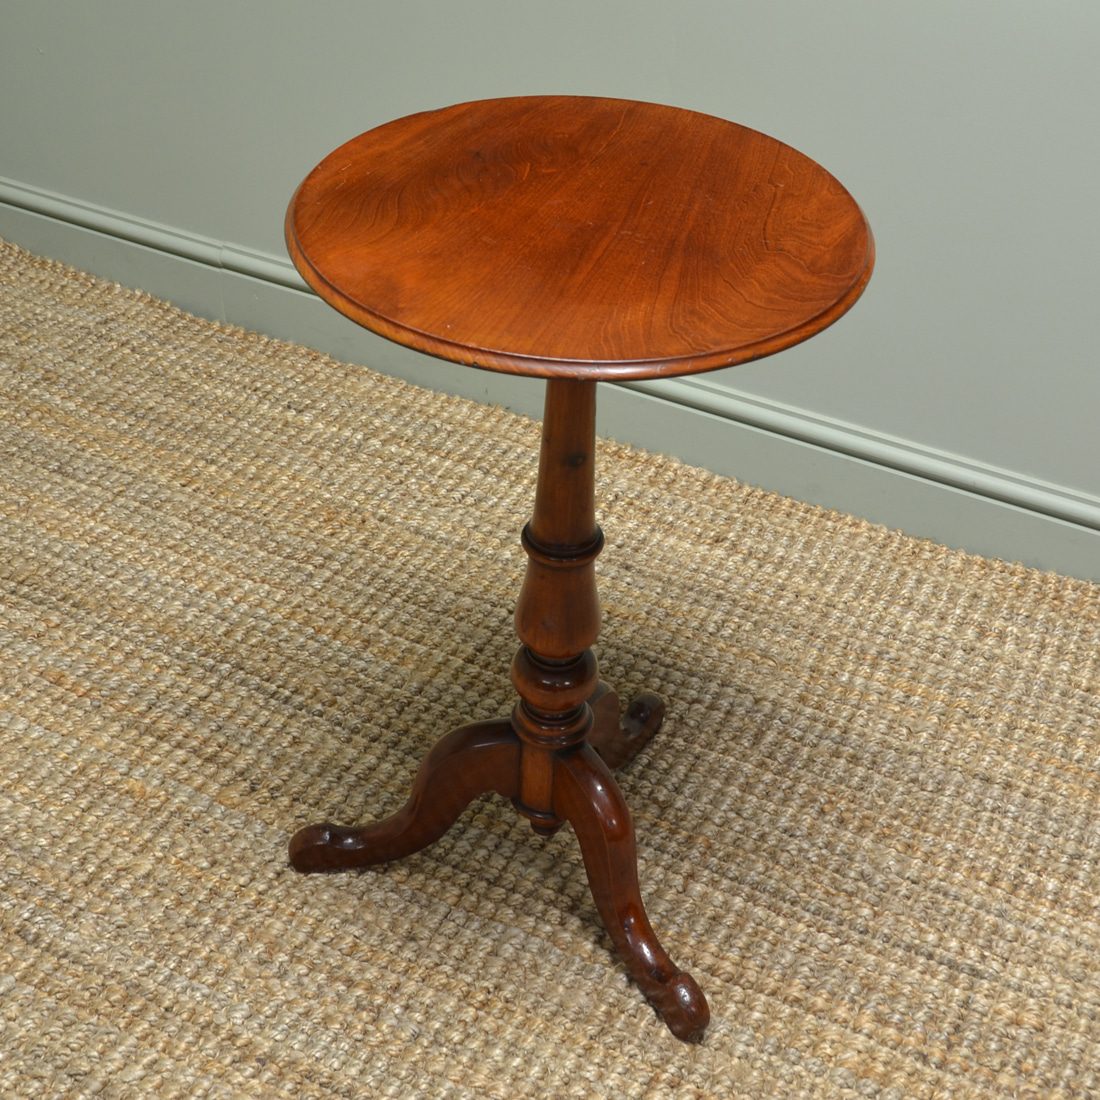 Beautifully Figured Victorian Mahogany Antique Occasional Table By Wylie & Lochhead Glasgow.